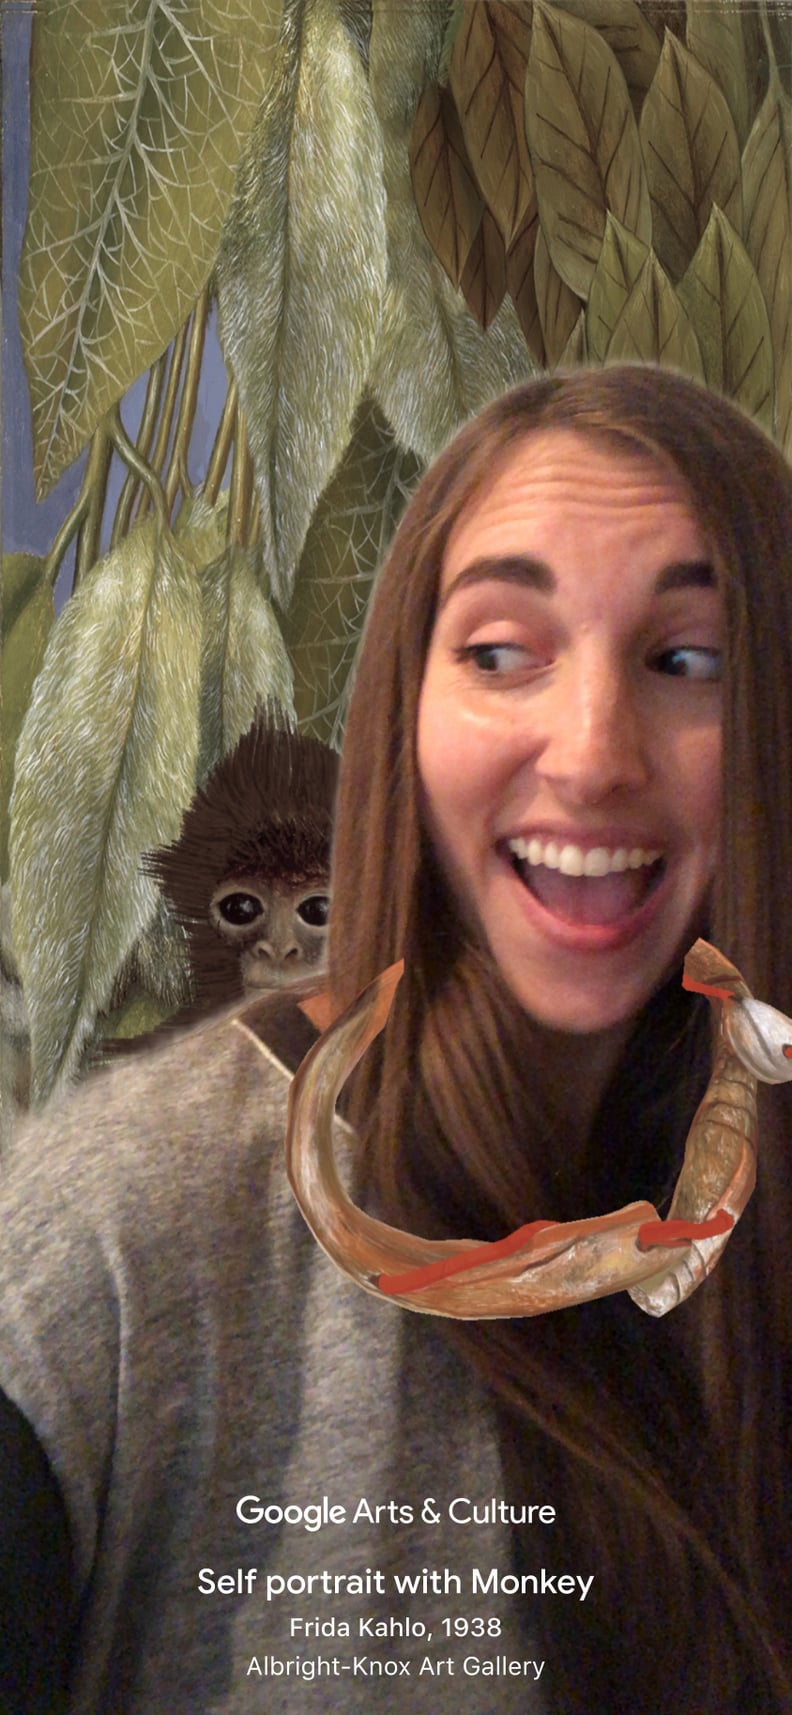 What the Frida Kahlo "Self Portrait With Monkey" Filter Looks Like